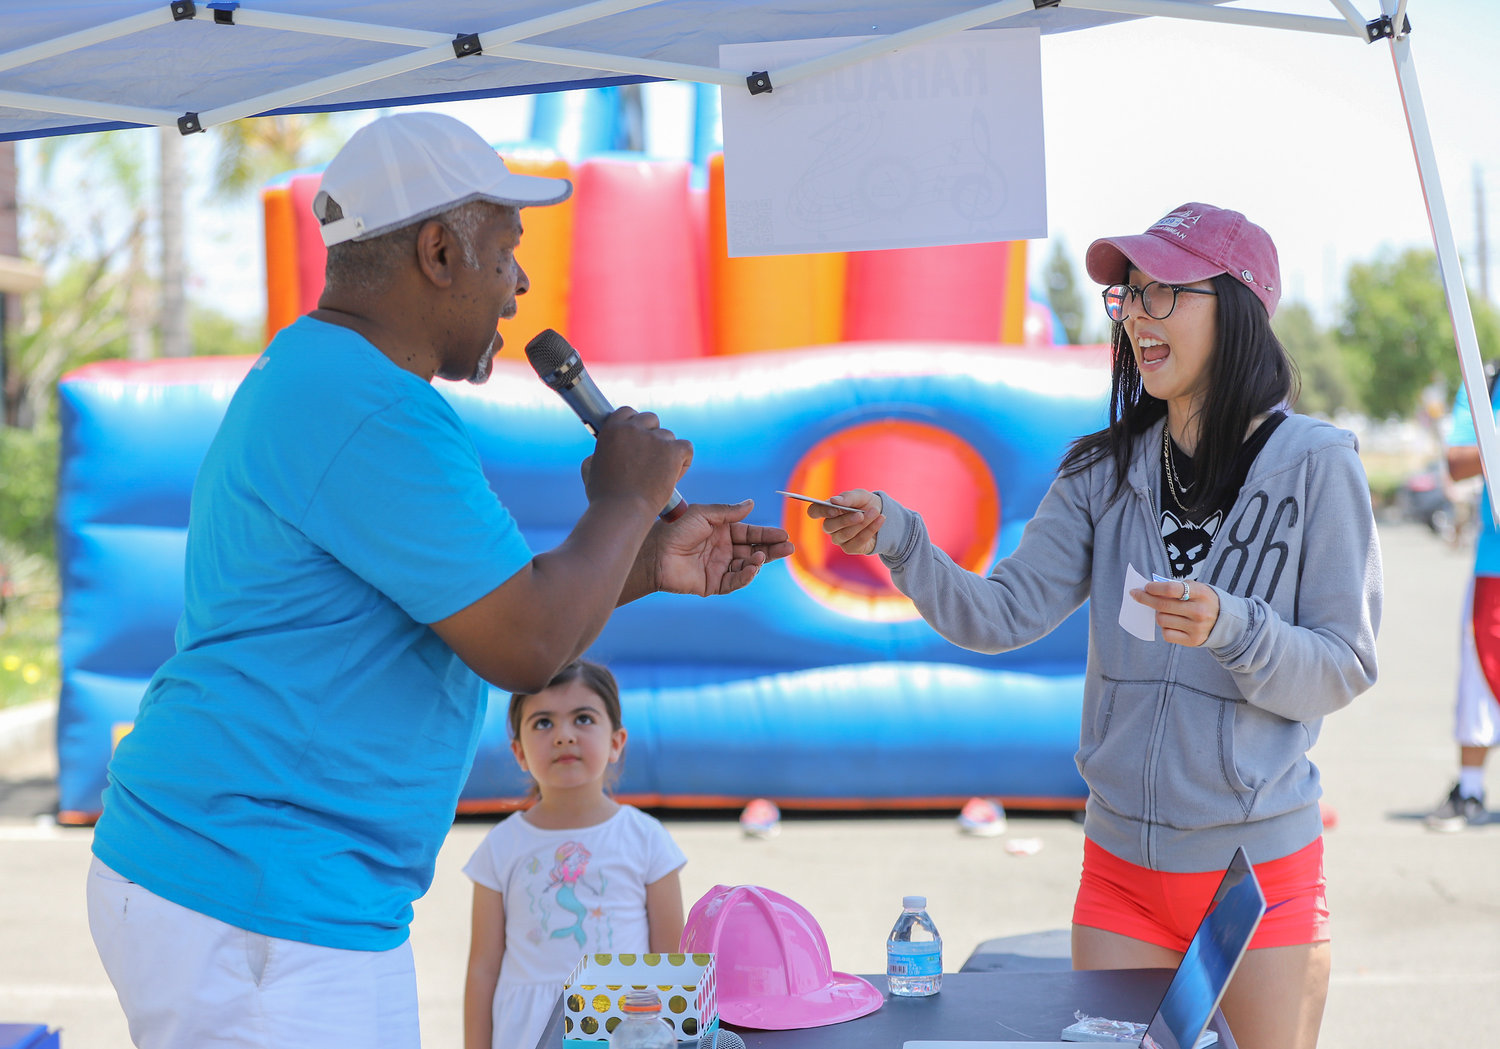 Reverend Felton Patrick Christian, interim director of outreach and evangelism at Friendship Baptist Church in Yorba Linda, Calif., awards a raffle prize to attendee Anne Yip at a block party at the church June 11 as part of Crossover Anaheim. The block party included free food, raffles, games, bounce houses and a fitness boot camp. (NAMB/Sonya Singh)